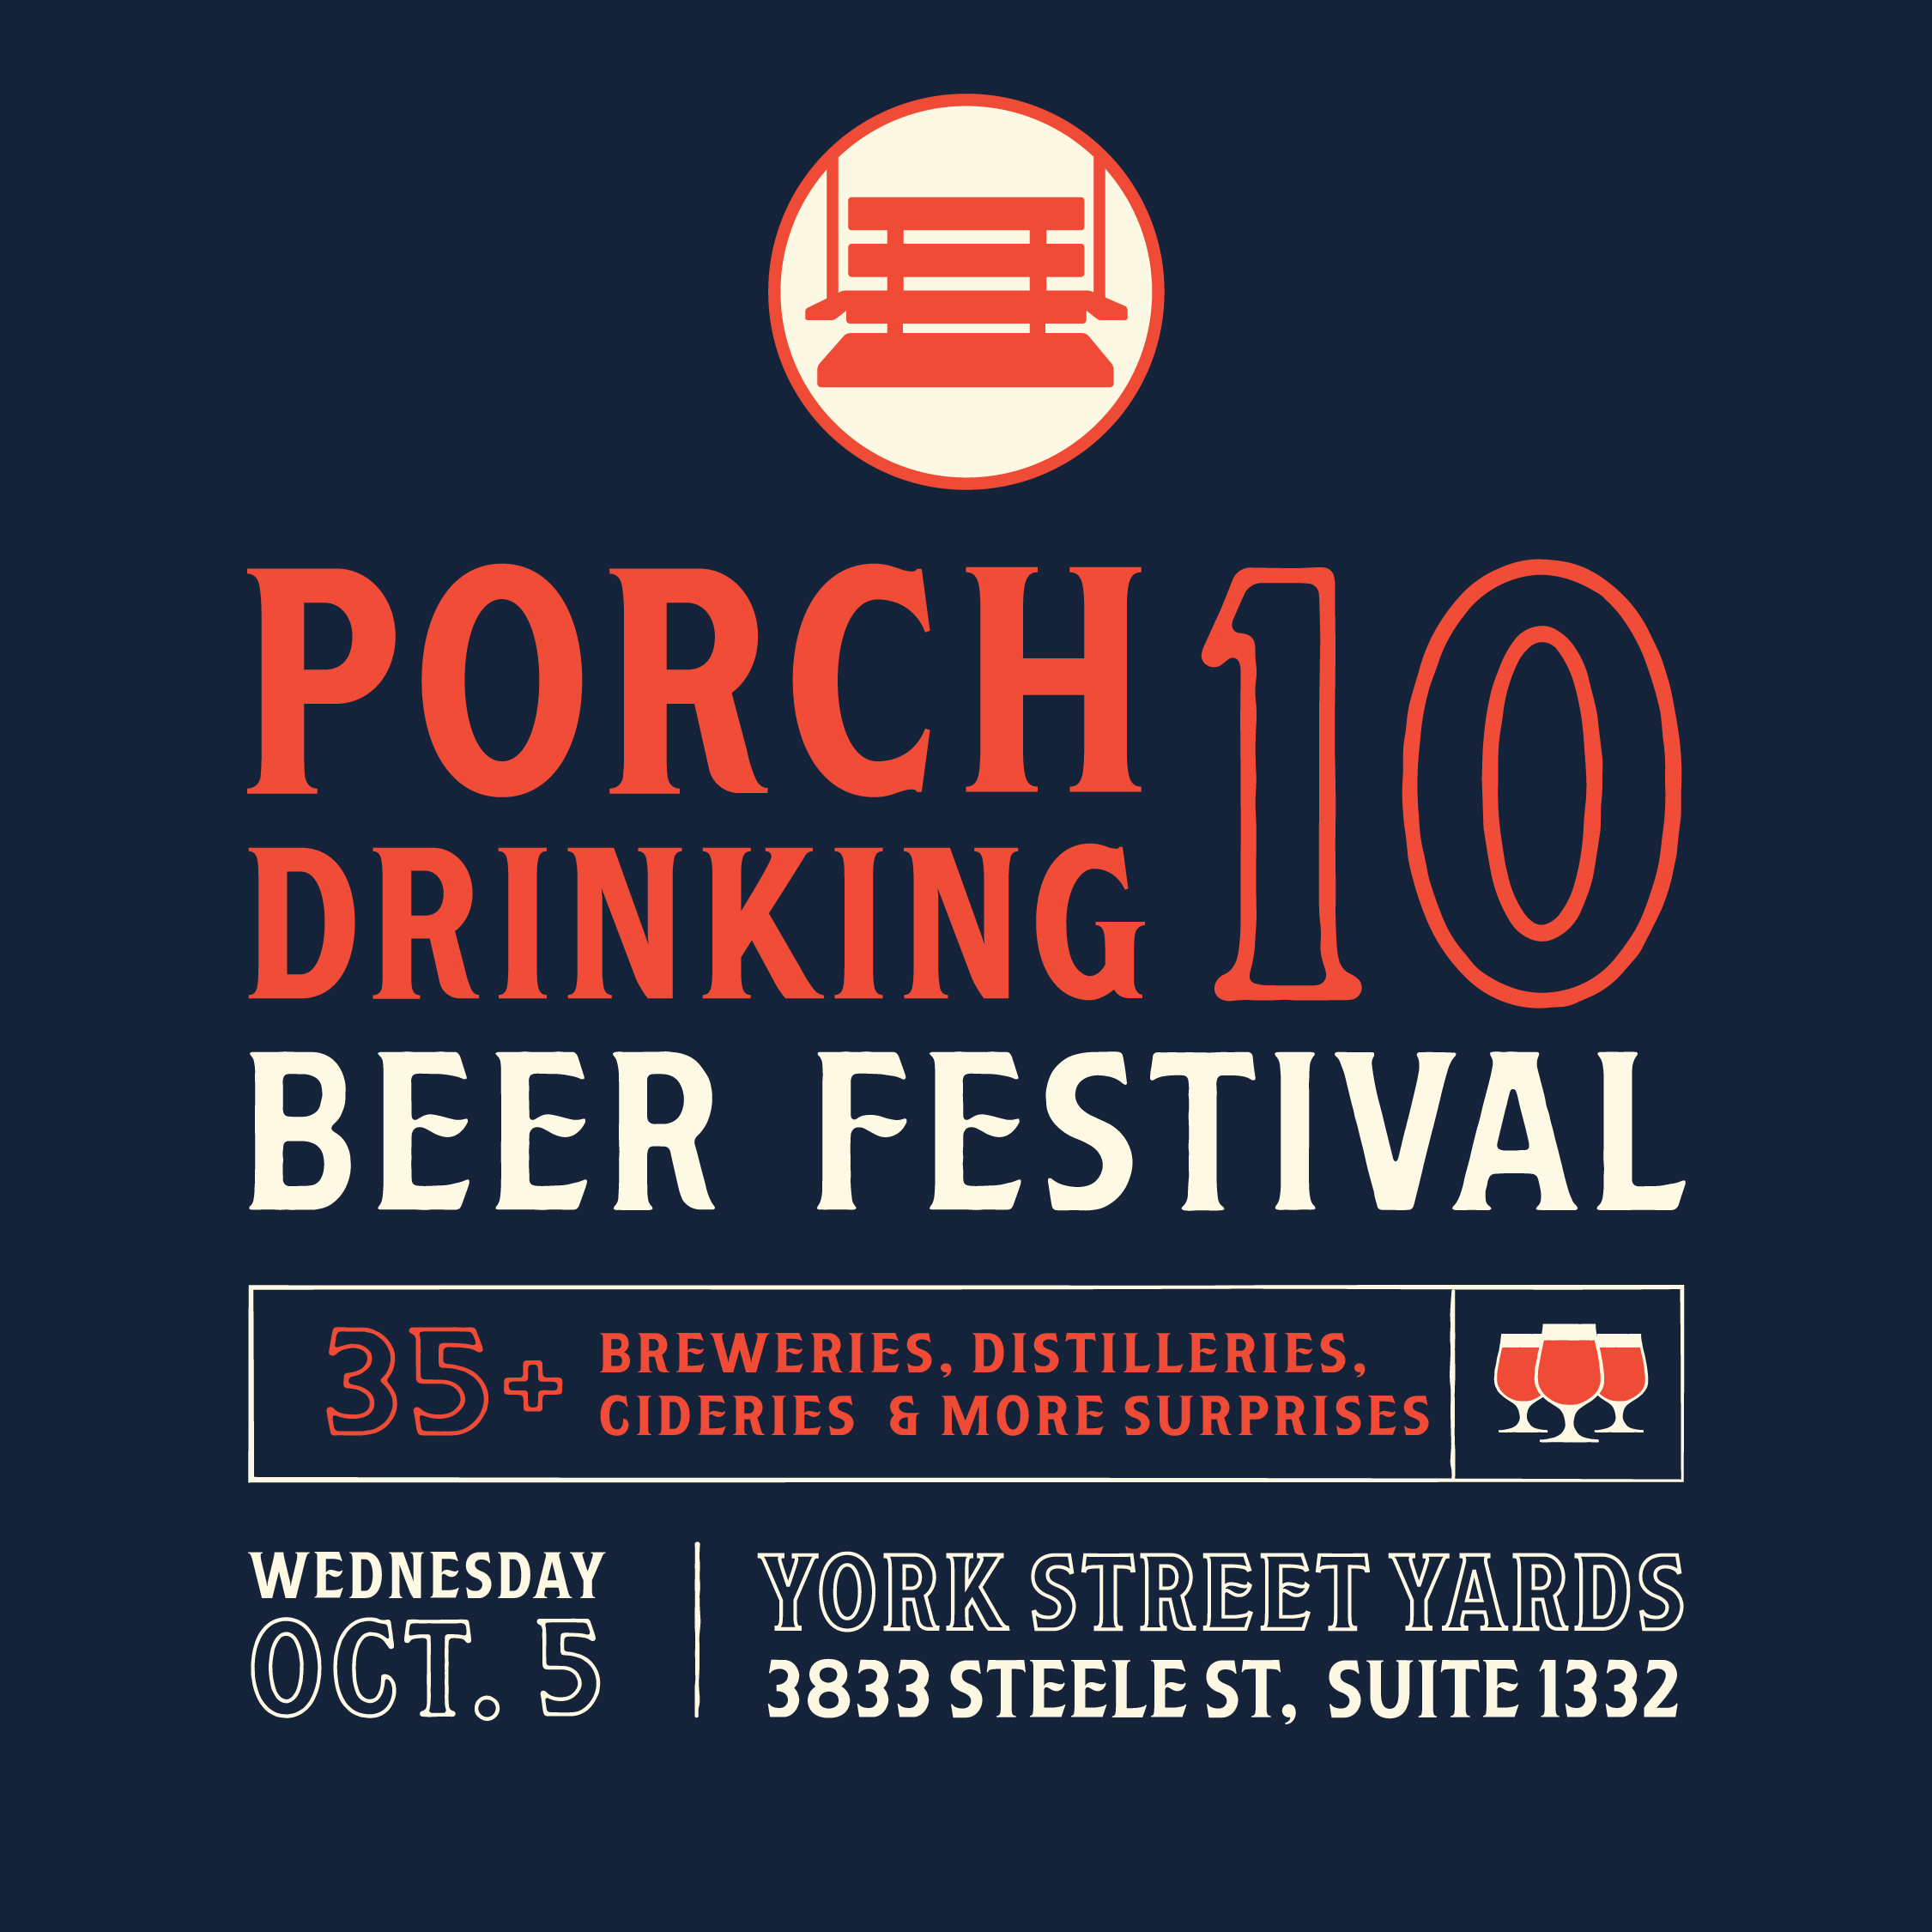 PorchDrinking's 10th Anniversary Beer Festival